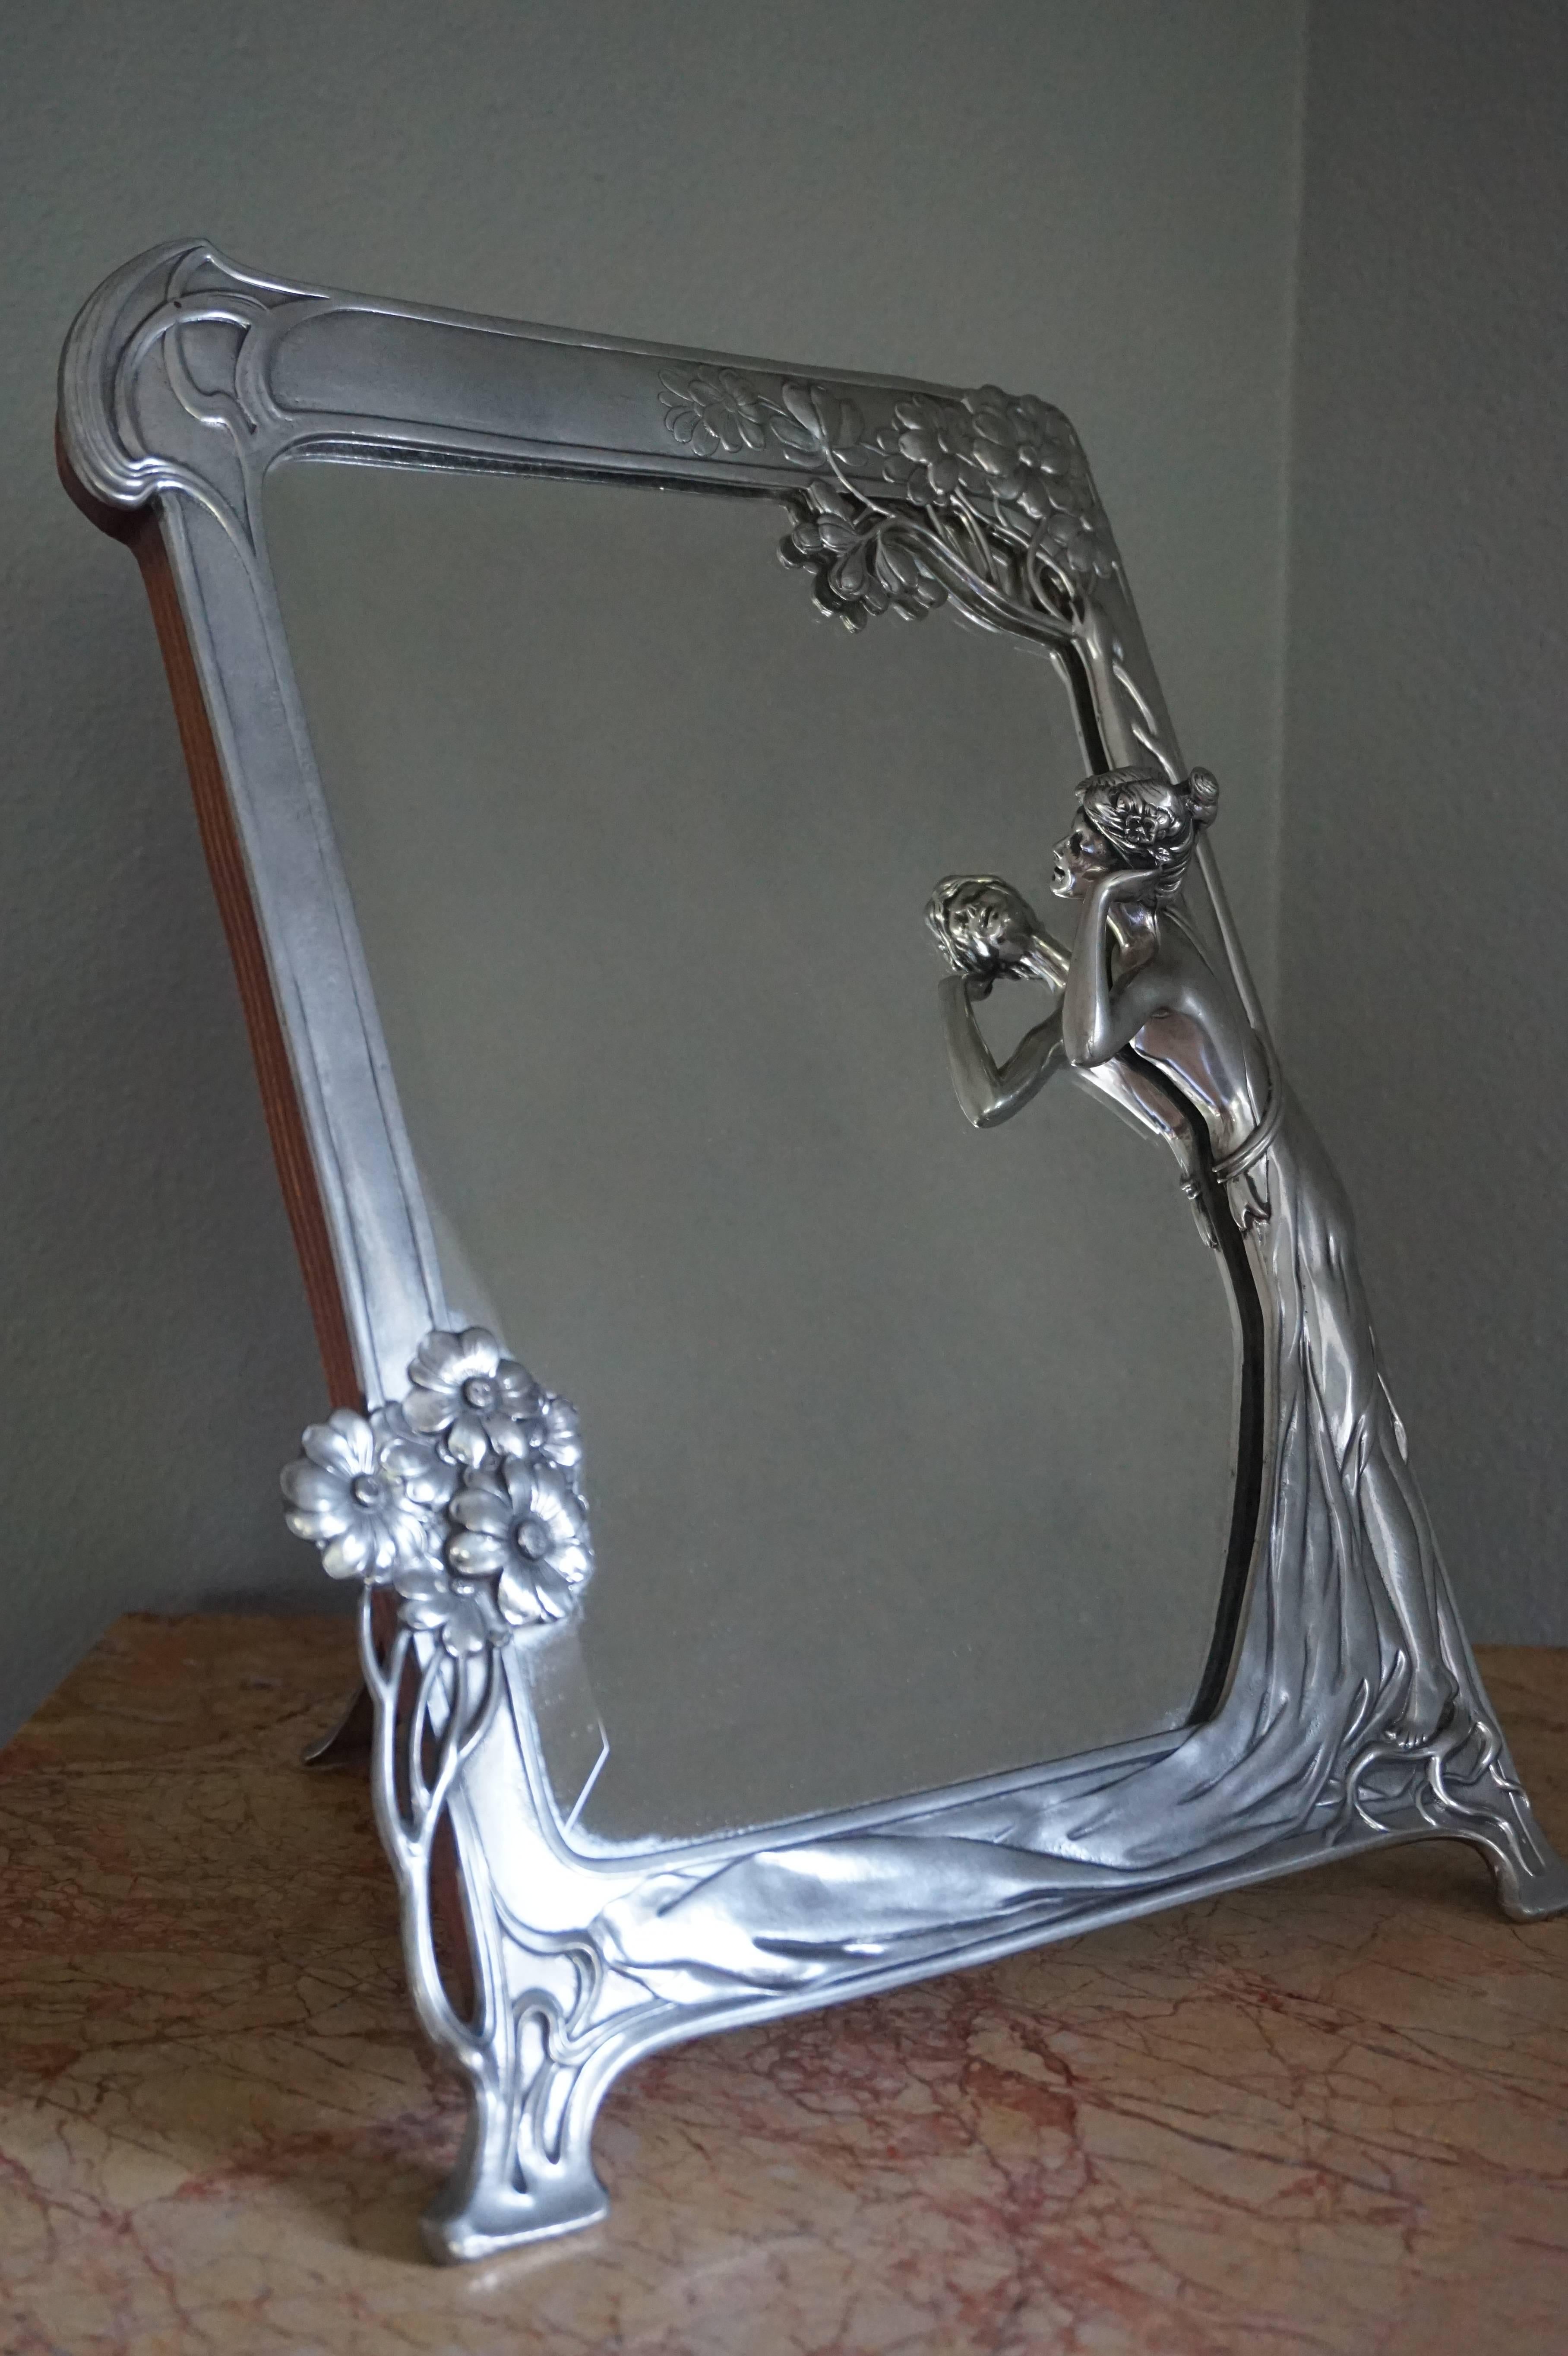 Wonderful and decorative mirror.

If you are looking for rare and elegant Art Nouveau pieces then this table mirror should be on your shortlist. This stunning mirror frame with a most elegant and integrated lady sculpture is made of pewter and the